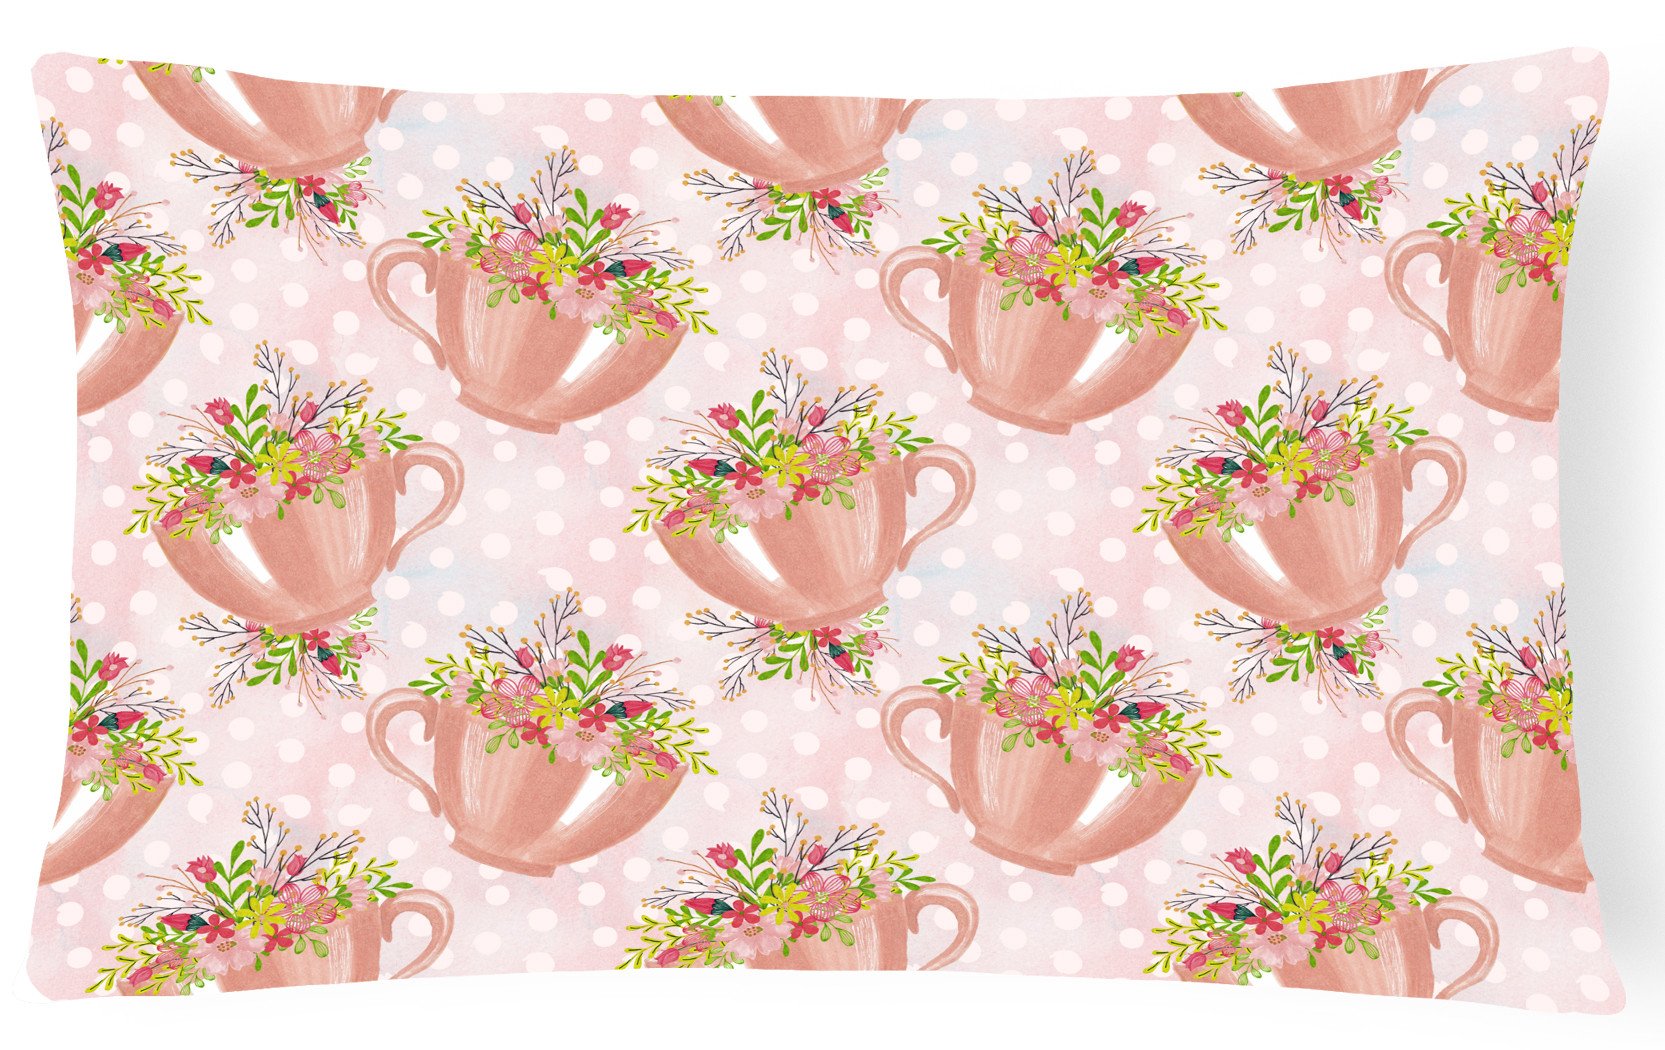 Tea Cup and Flowers Pink Canvas Fabric Decorative Pillow BB7481PW1216 by Caroline's Treasures